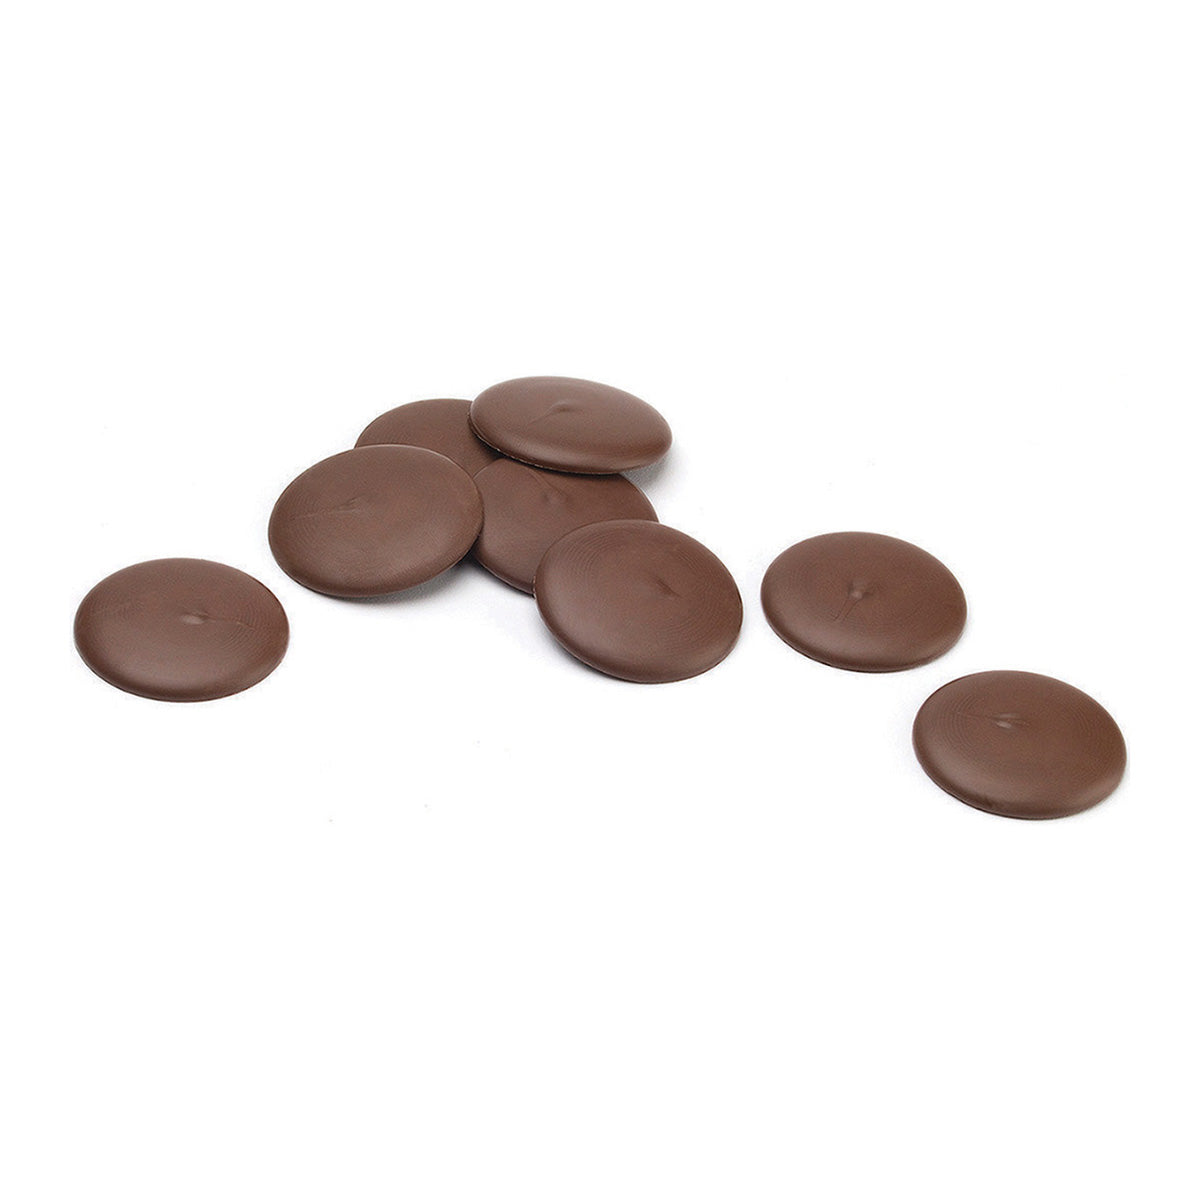 Sombra 54% chocolate couverture out of box